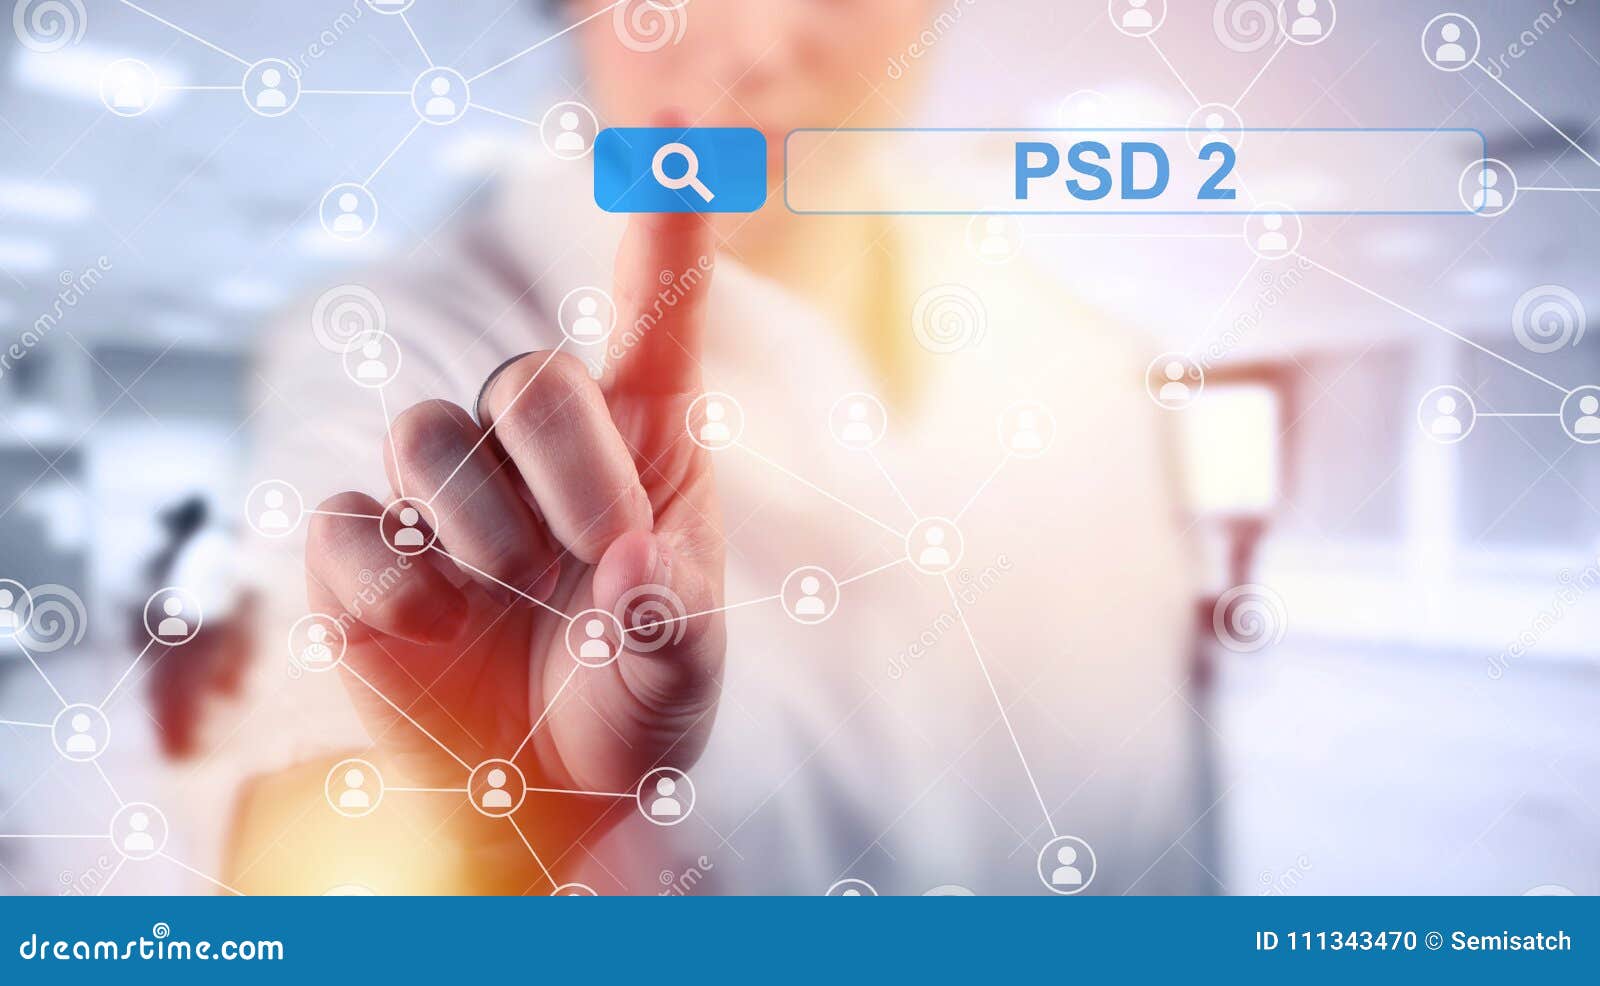 concept of psd2 - payment services directive